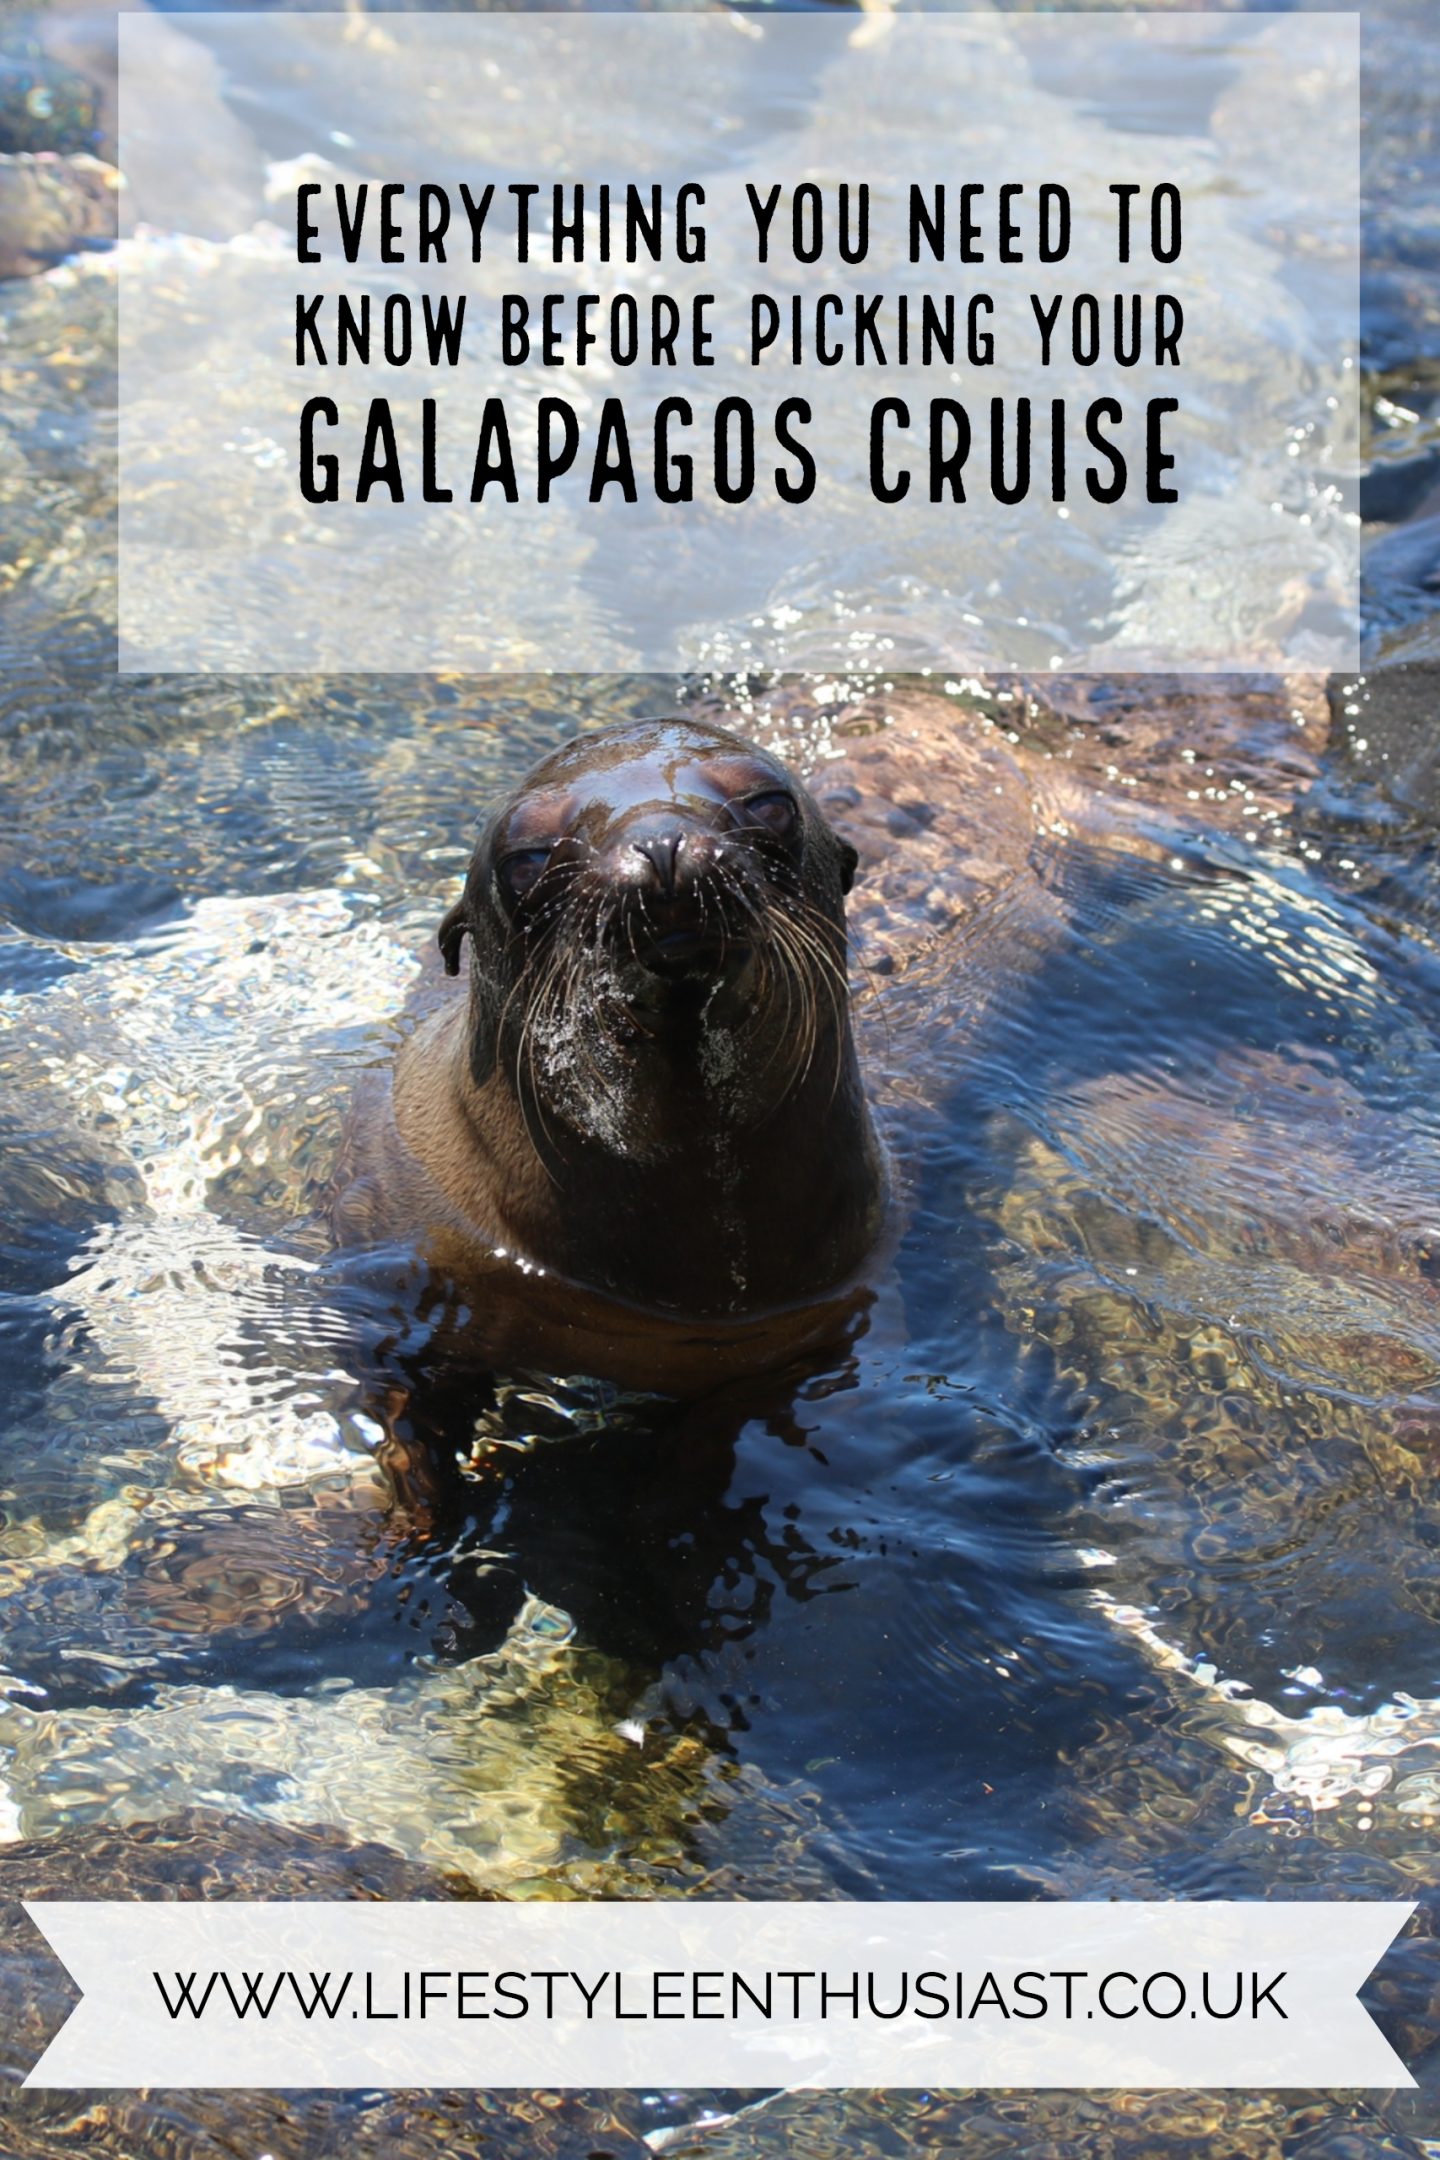 How to pick your galapagos cruise boat